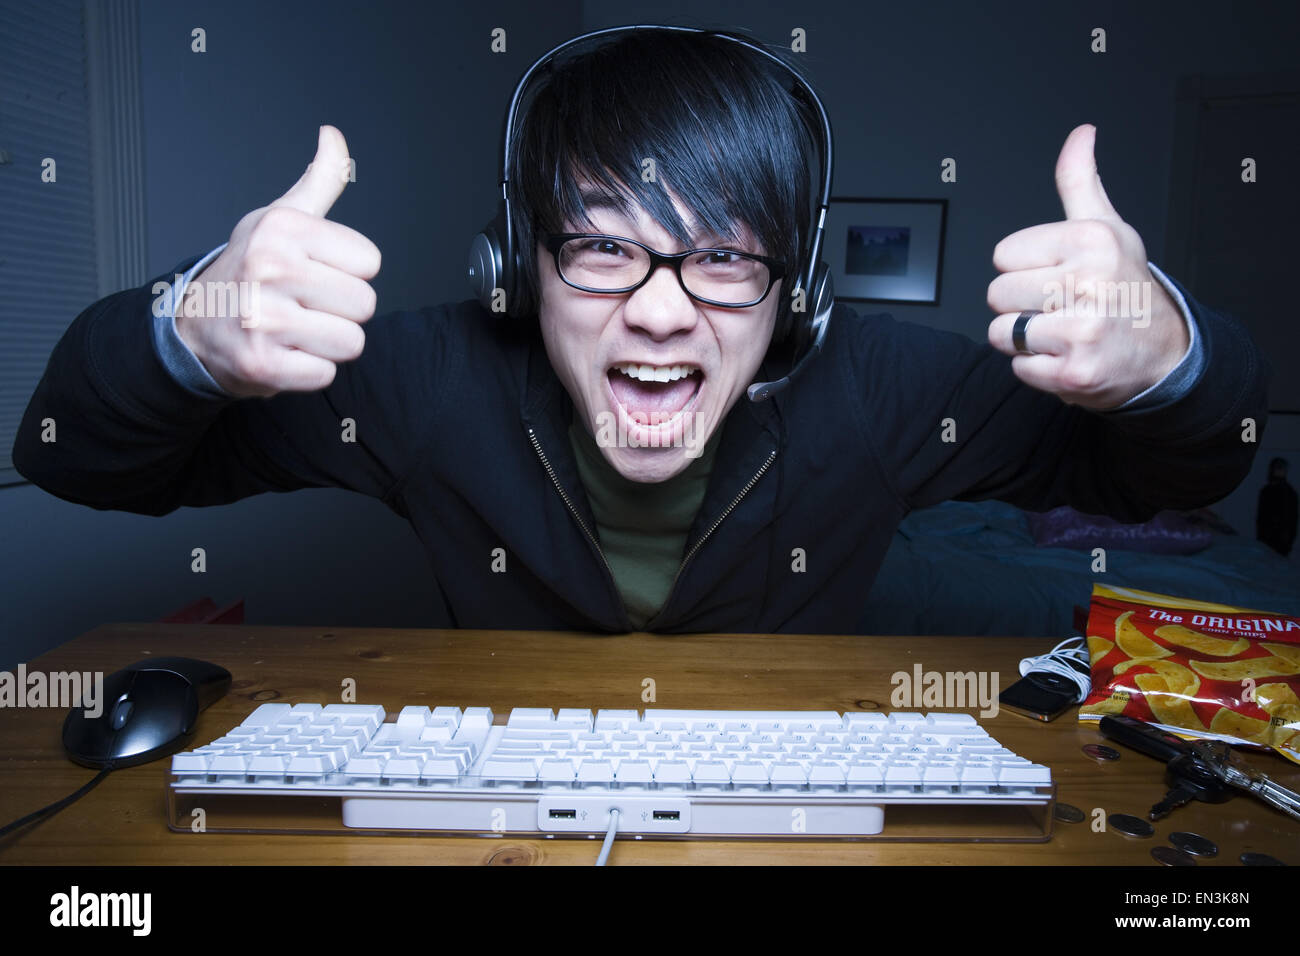 Man with headset making fists and sitting at keyboard Stock Photo